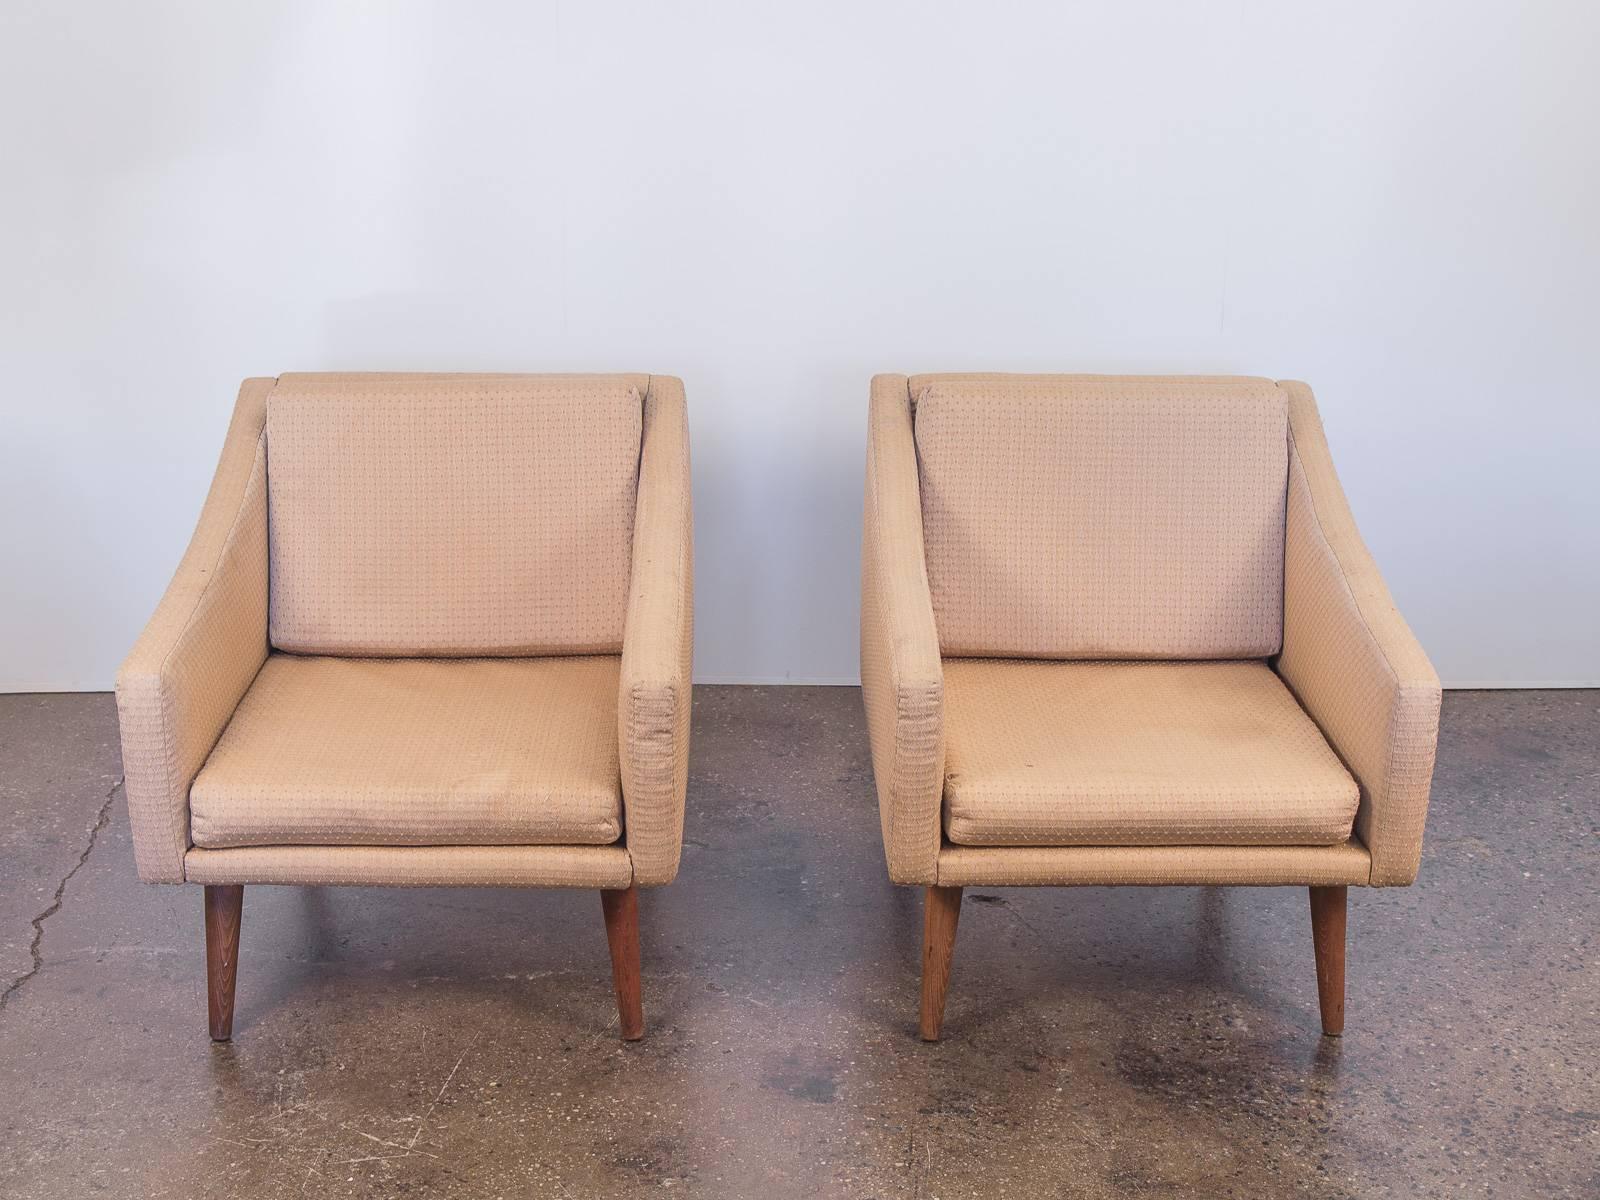 Pair of vintage, modern club chairs. Form is attractive, with subtly sloping armrests and deep seats making them an ultra comfortable pair of lounge chairs. Cushions are cozy with plenty of life and the tapered poplar legs are trim and sturdy. Sandy